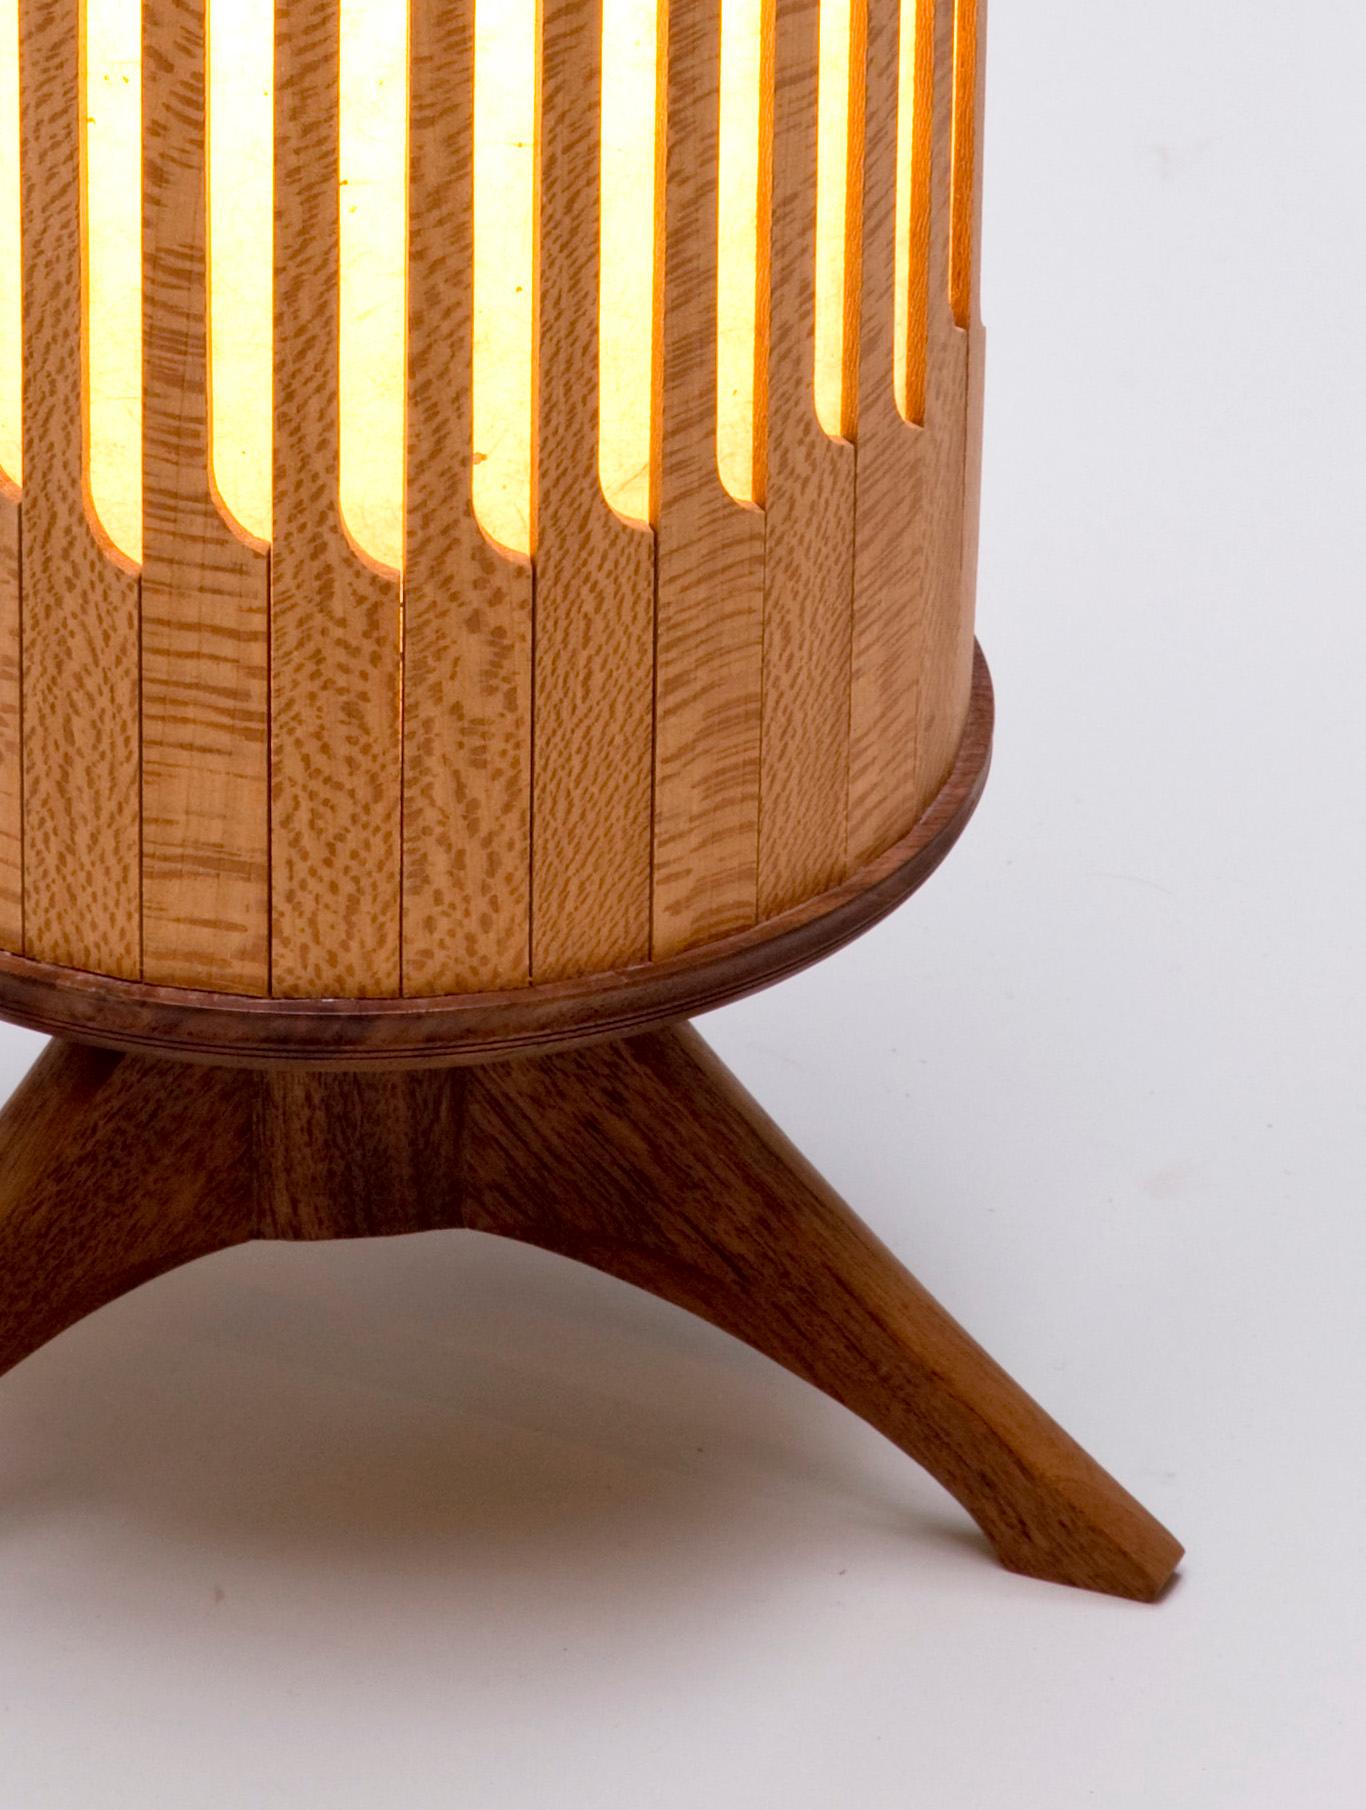 This lamp is an experiment in form and construction. The lacewood slats that make up the shade are constructed similarly to the tambours of a roll top desk but are repurposed to surround a light source. The paper lining softens the light to create